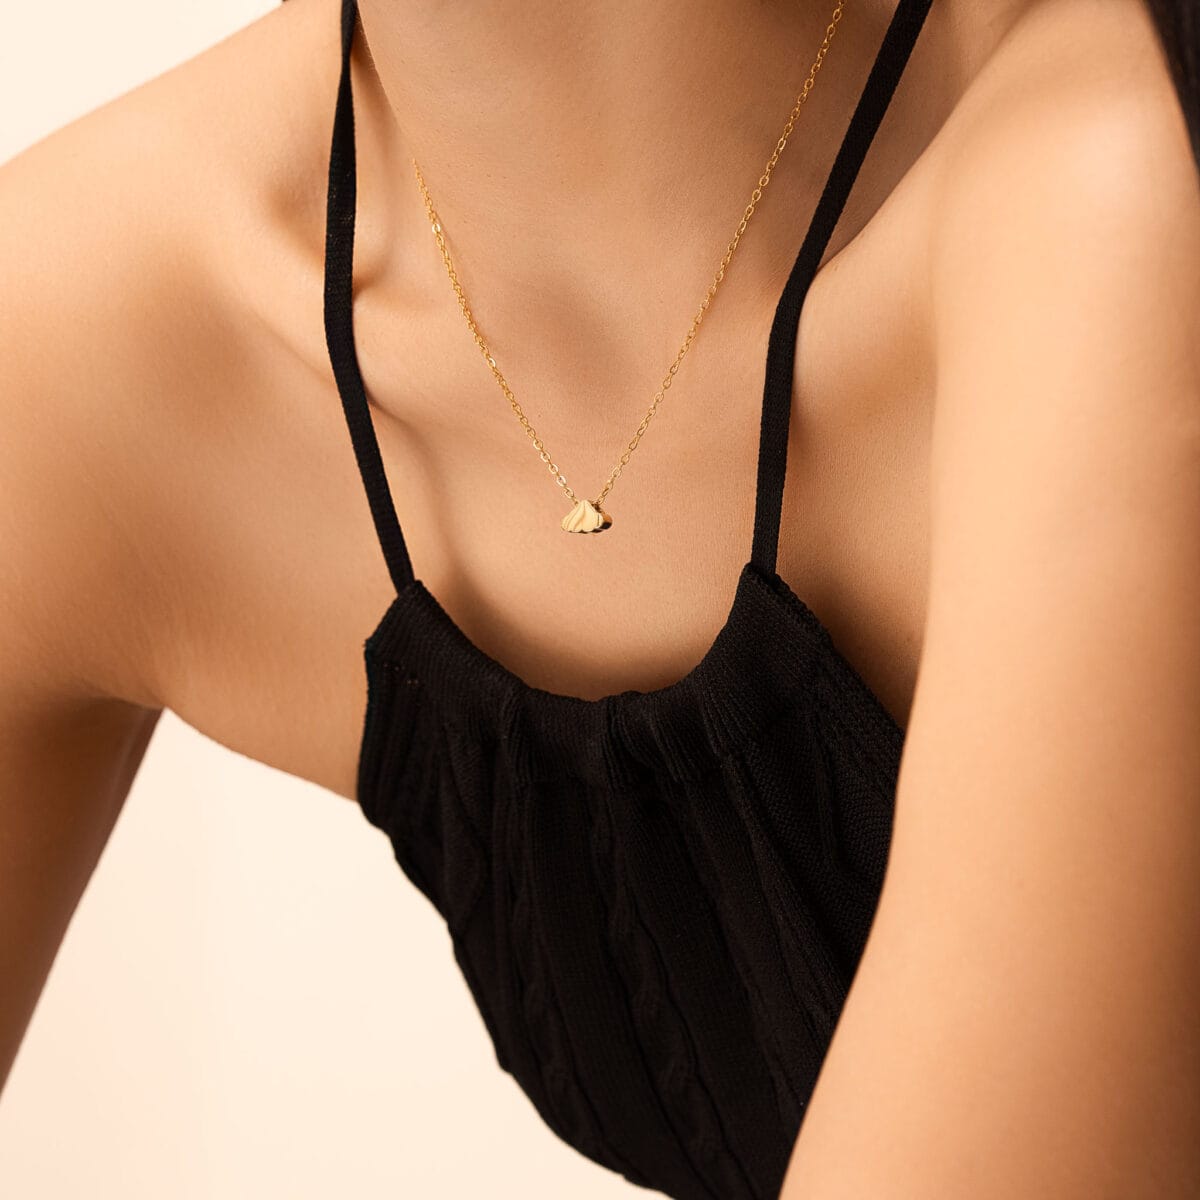 https://m.clubbella.co/product/volare-cloud-gold-charm-necklace/ Volare Cloud Gold Charm Necklace (3)